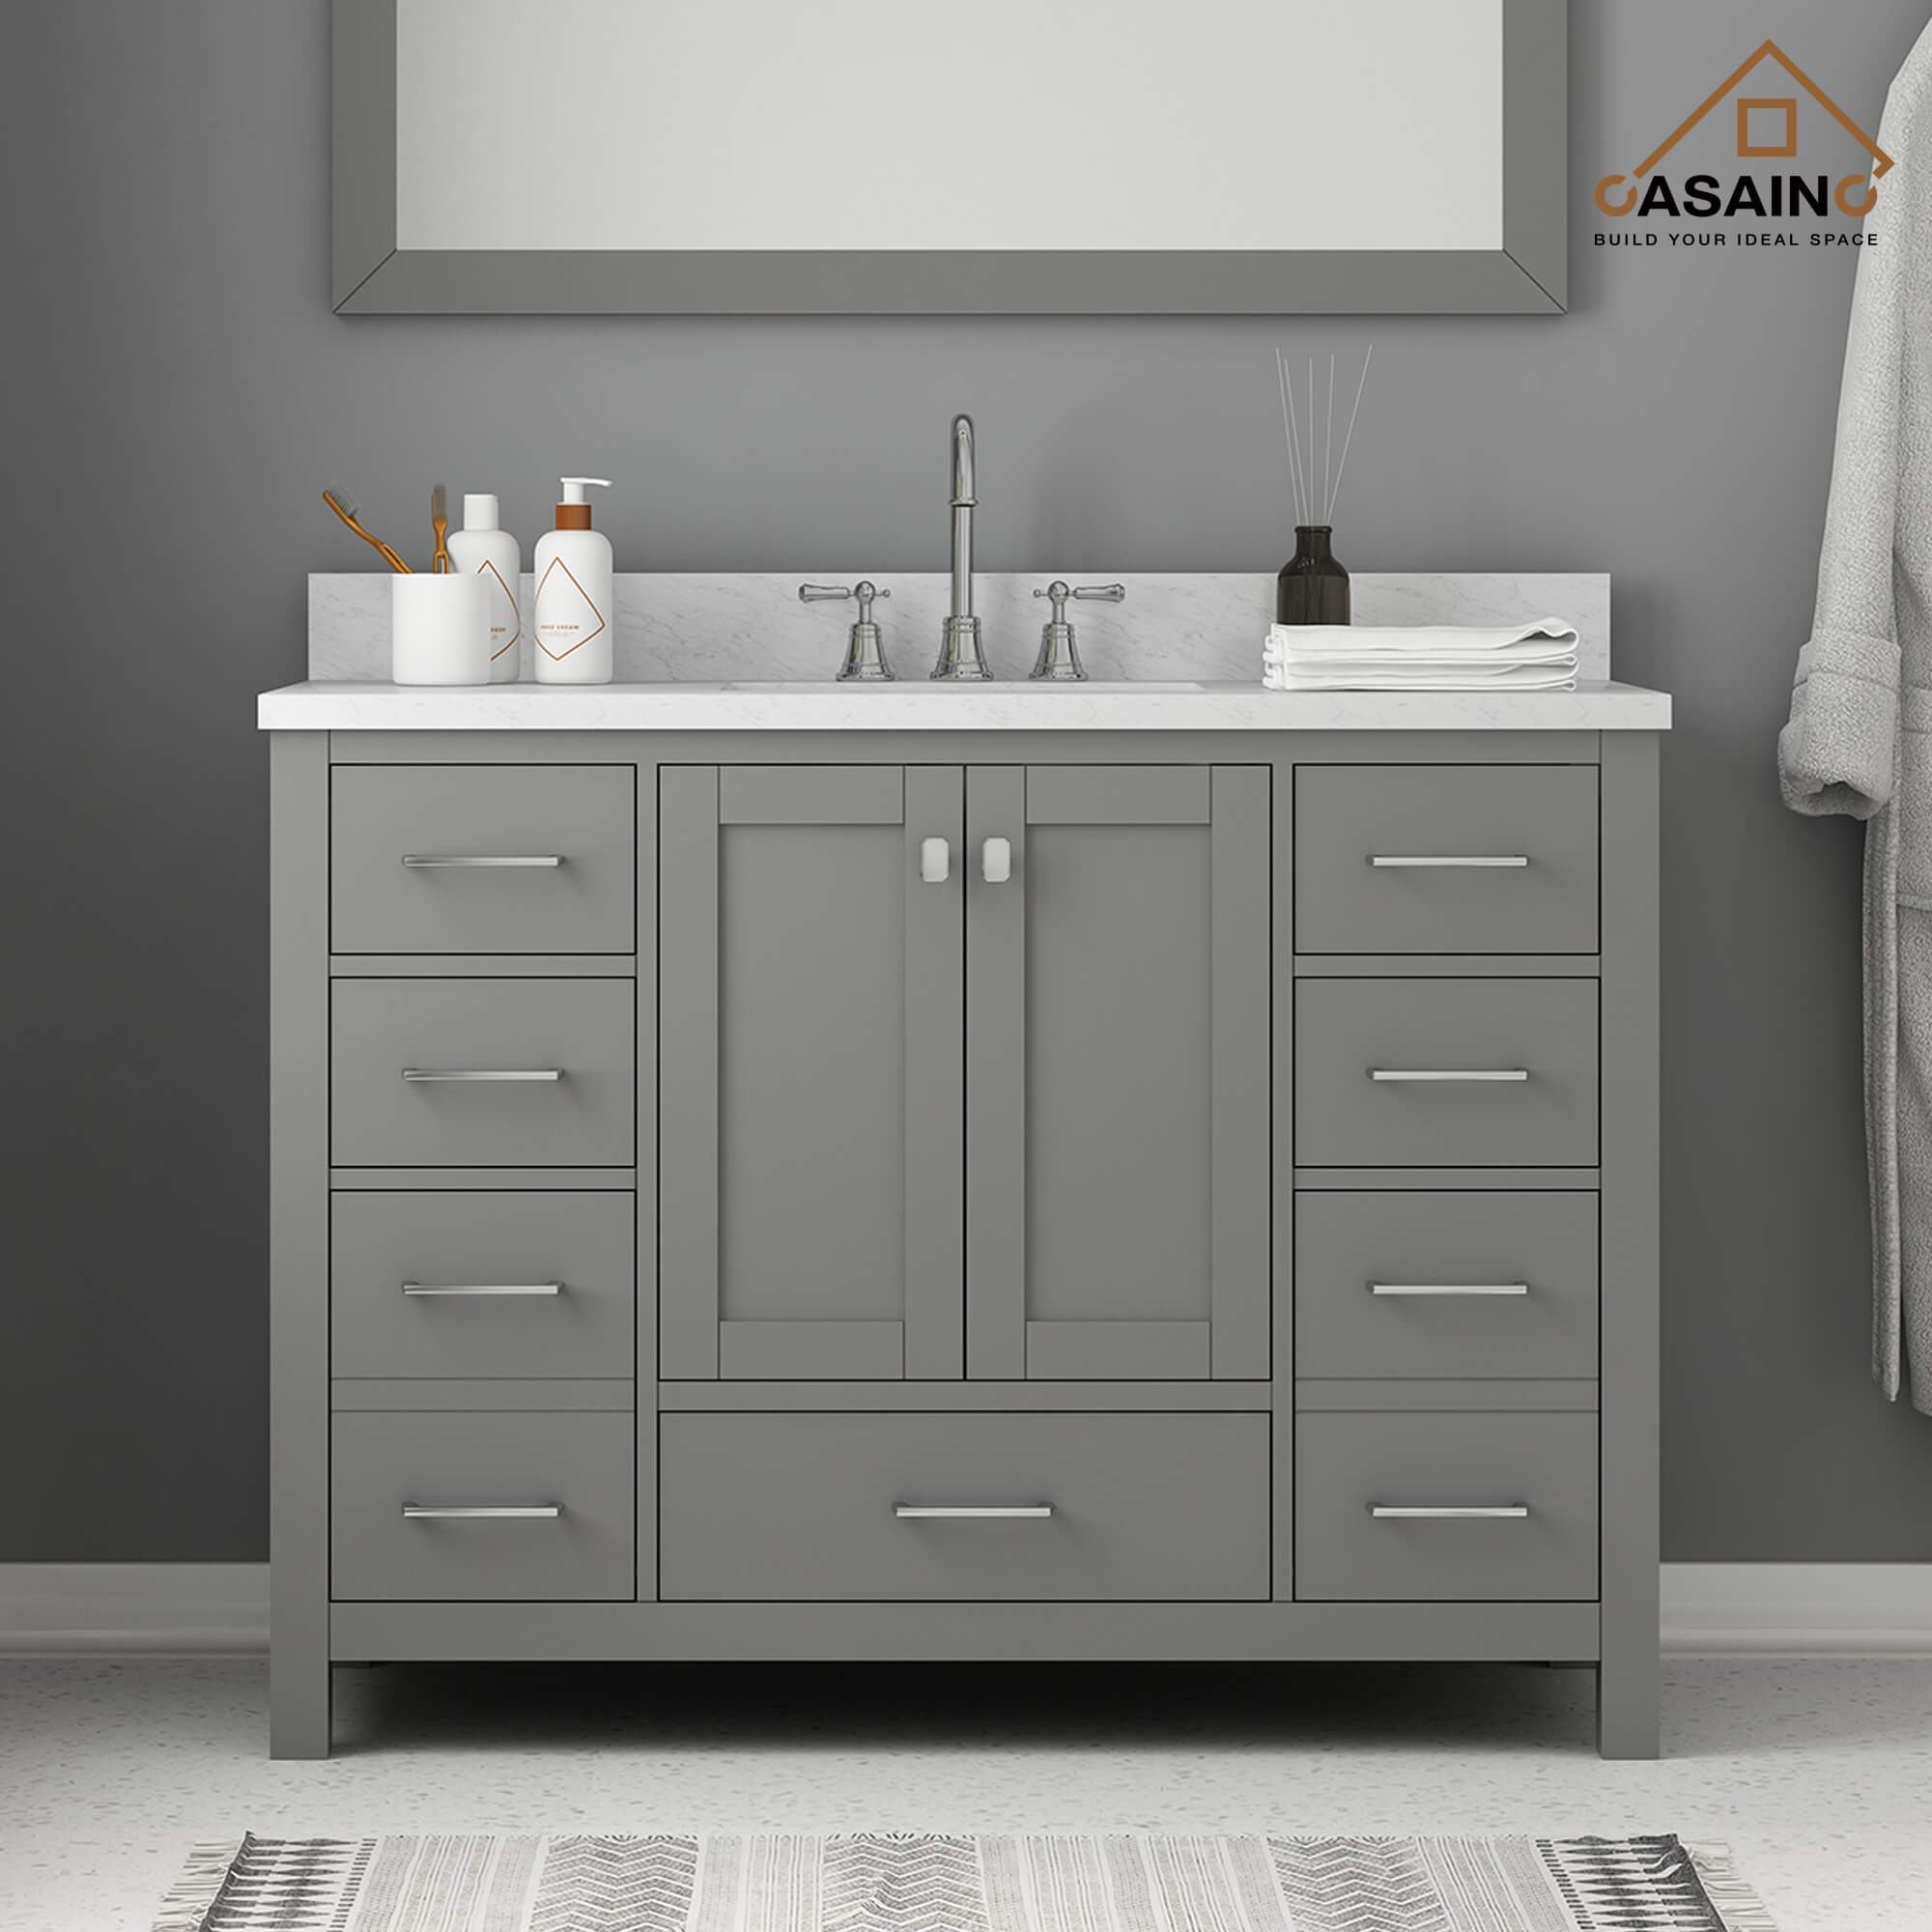 CASAINC 48 x 22 x 35.4 in. Solid Wood Bath Vanity with Carrara White Marble Countertop in Gray/White (No/With Mirror)